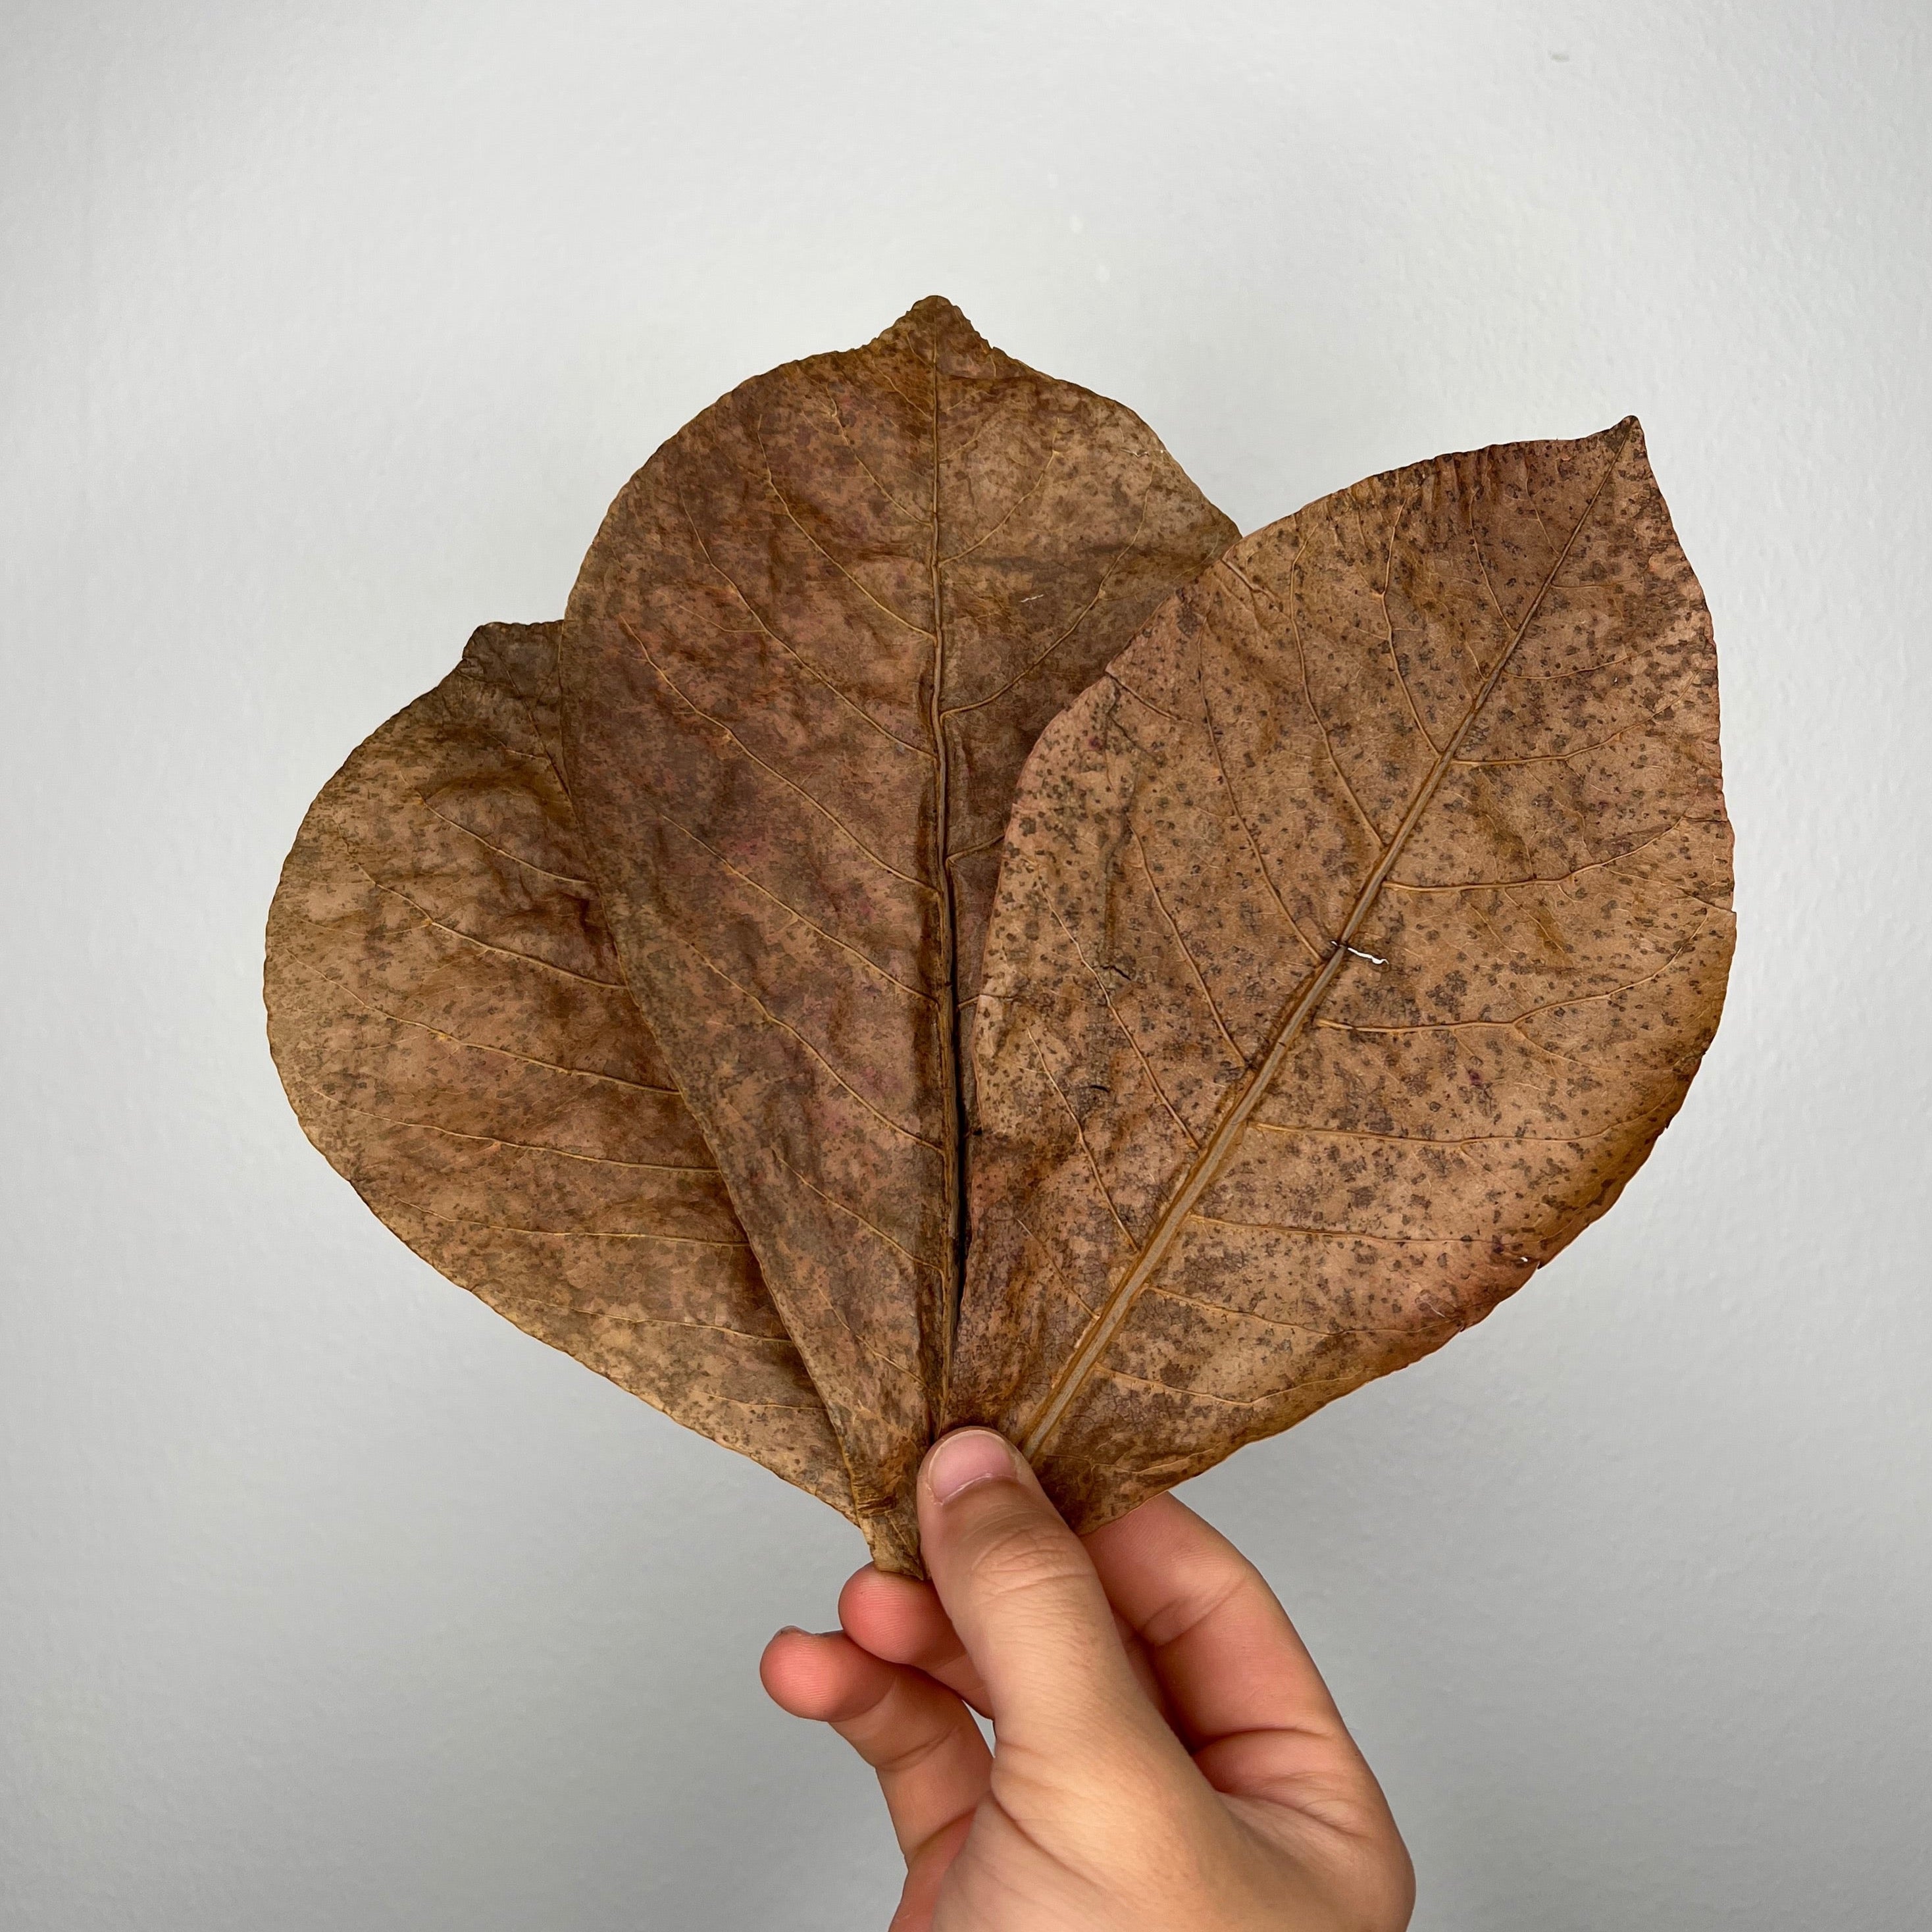 Indian Almond Leaves